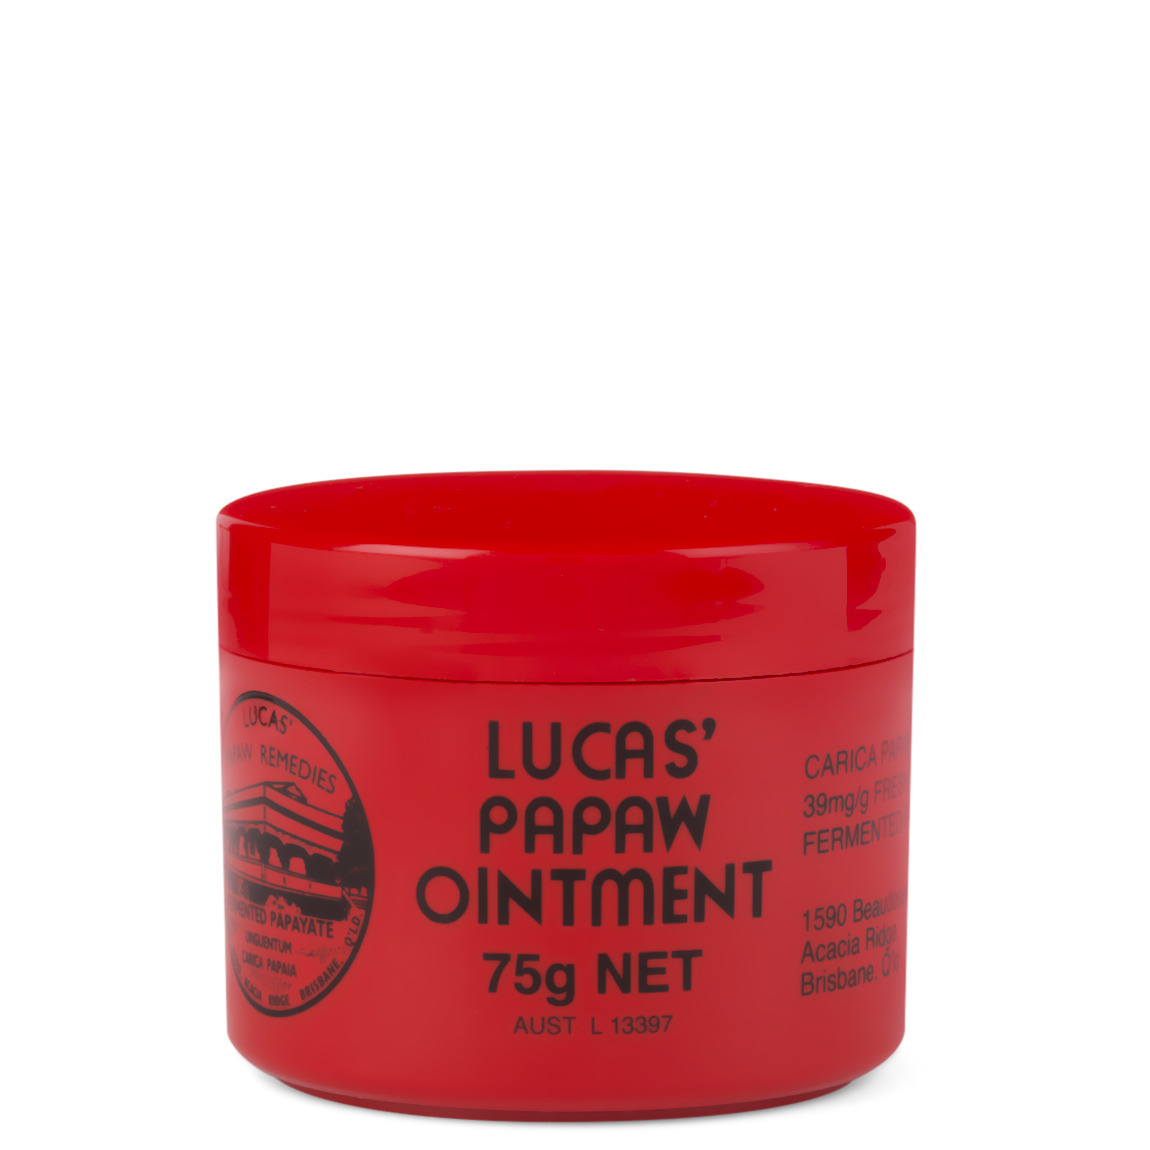 Is Lucas' Papaw Ointment Good For You?